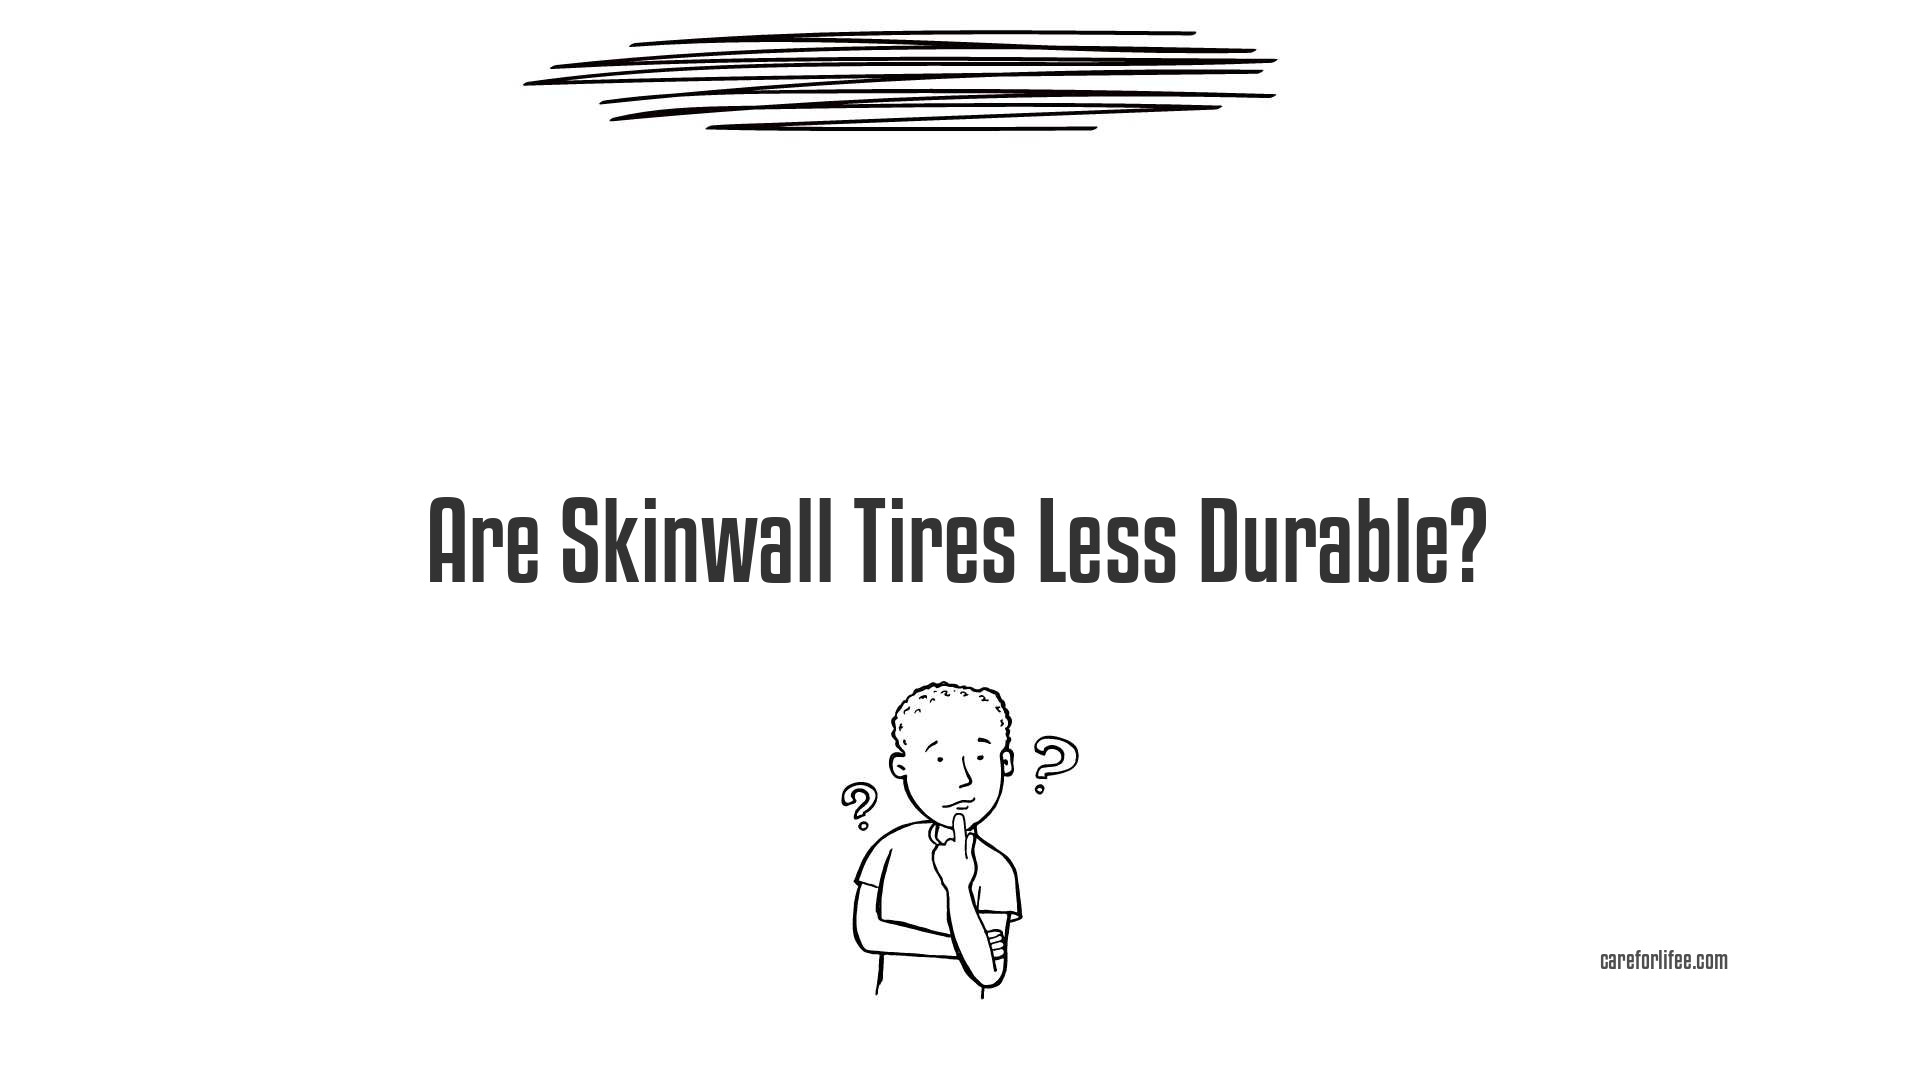 Are Skinwall Tires Less Durable?